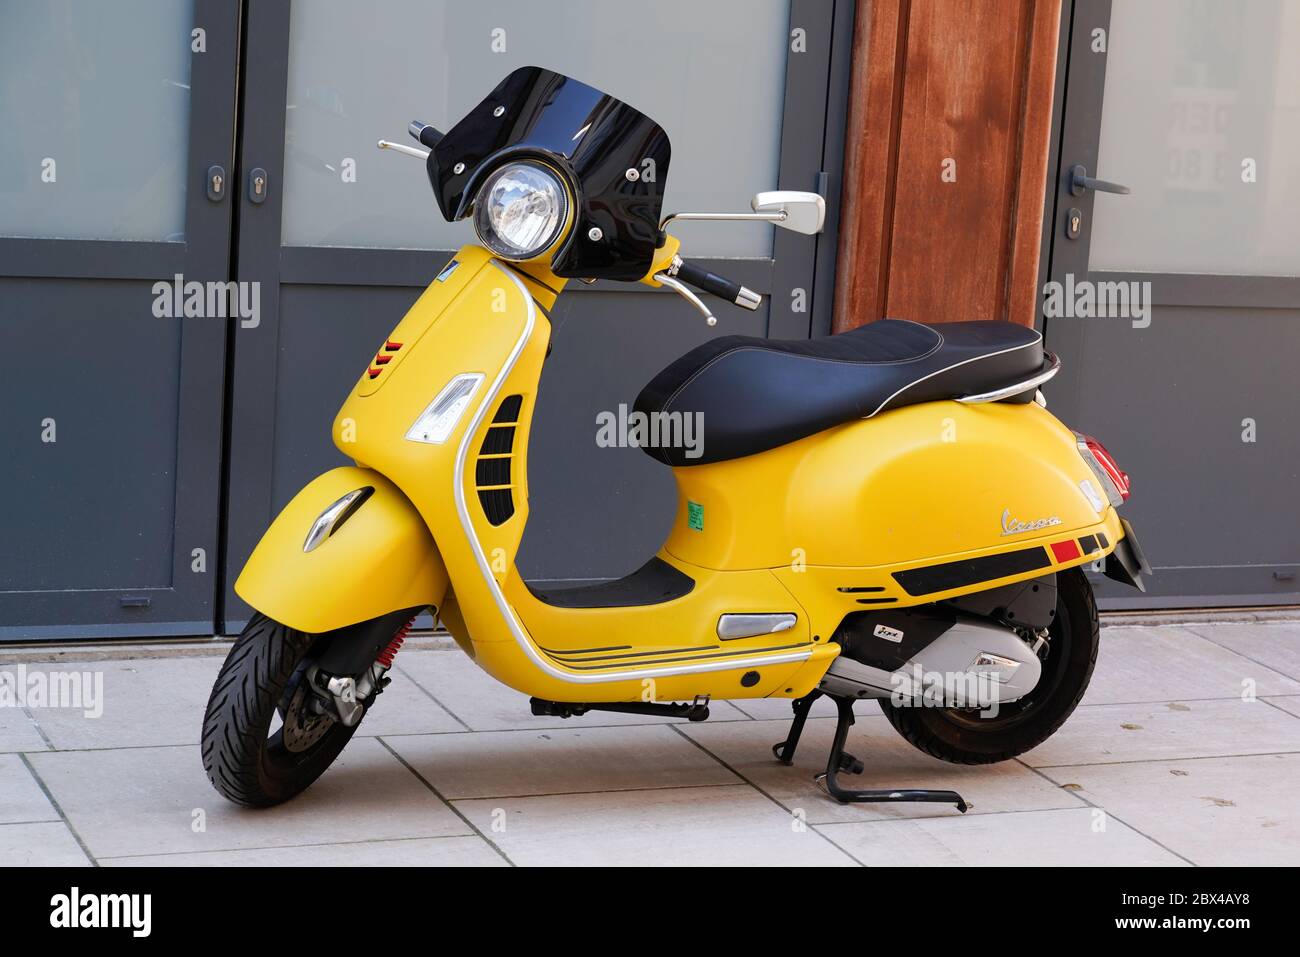 Bordeaux , Aquitaine / France - 06 01 2020 : Vespa yellow motorbike Italian  brand of scooter manufactured by Piaggio Stock Photo - Alamy